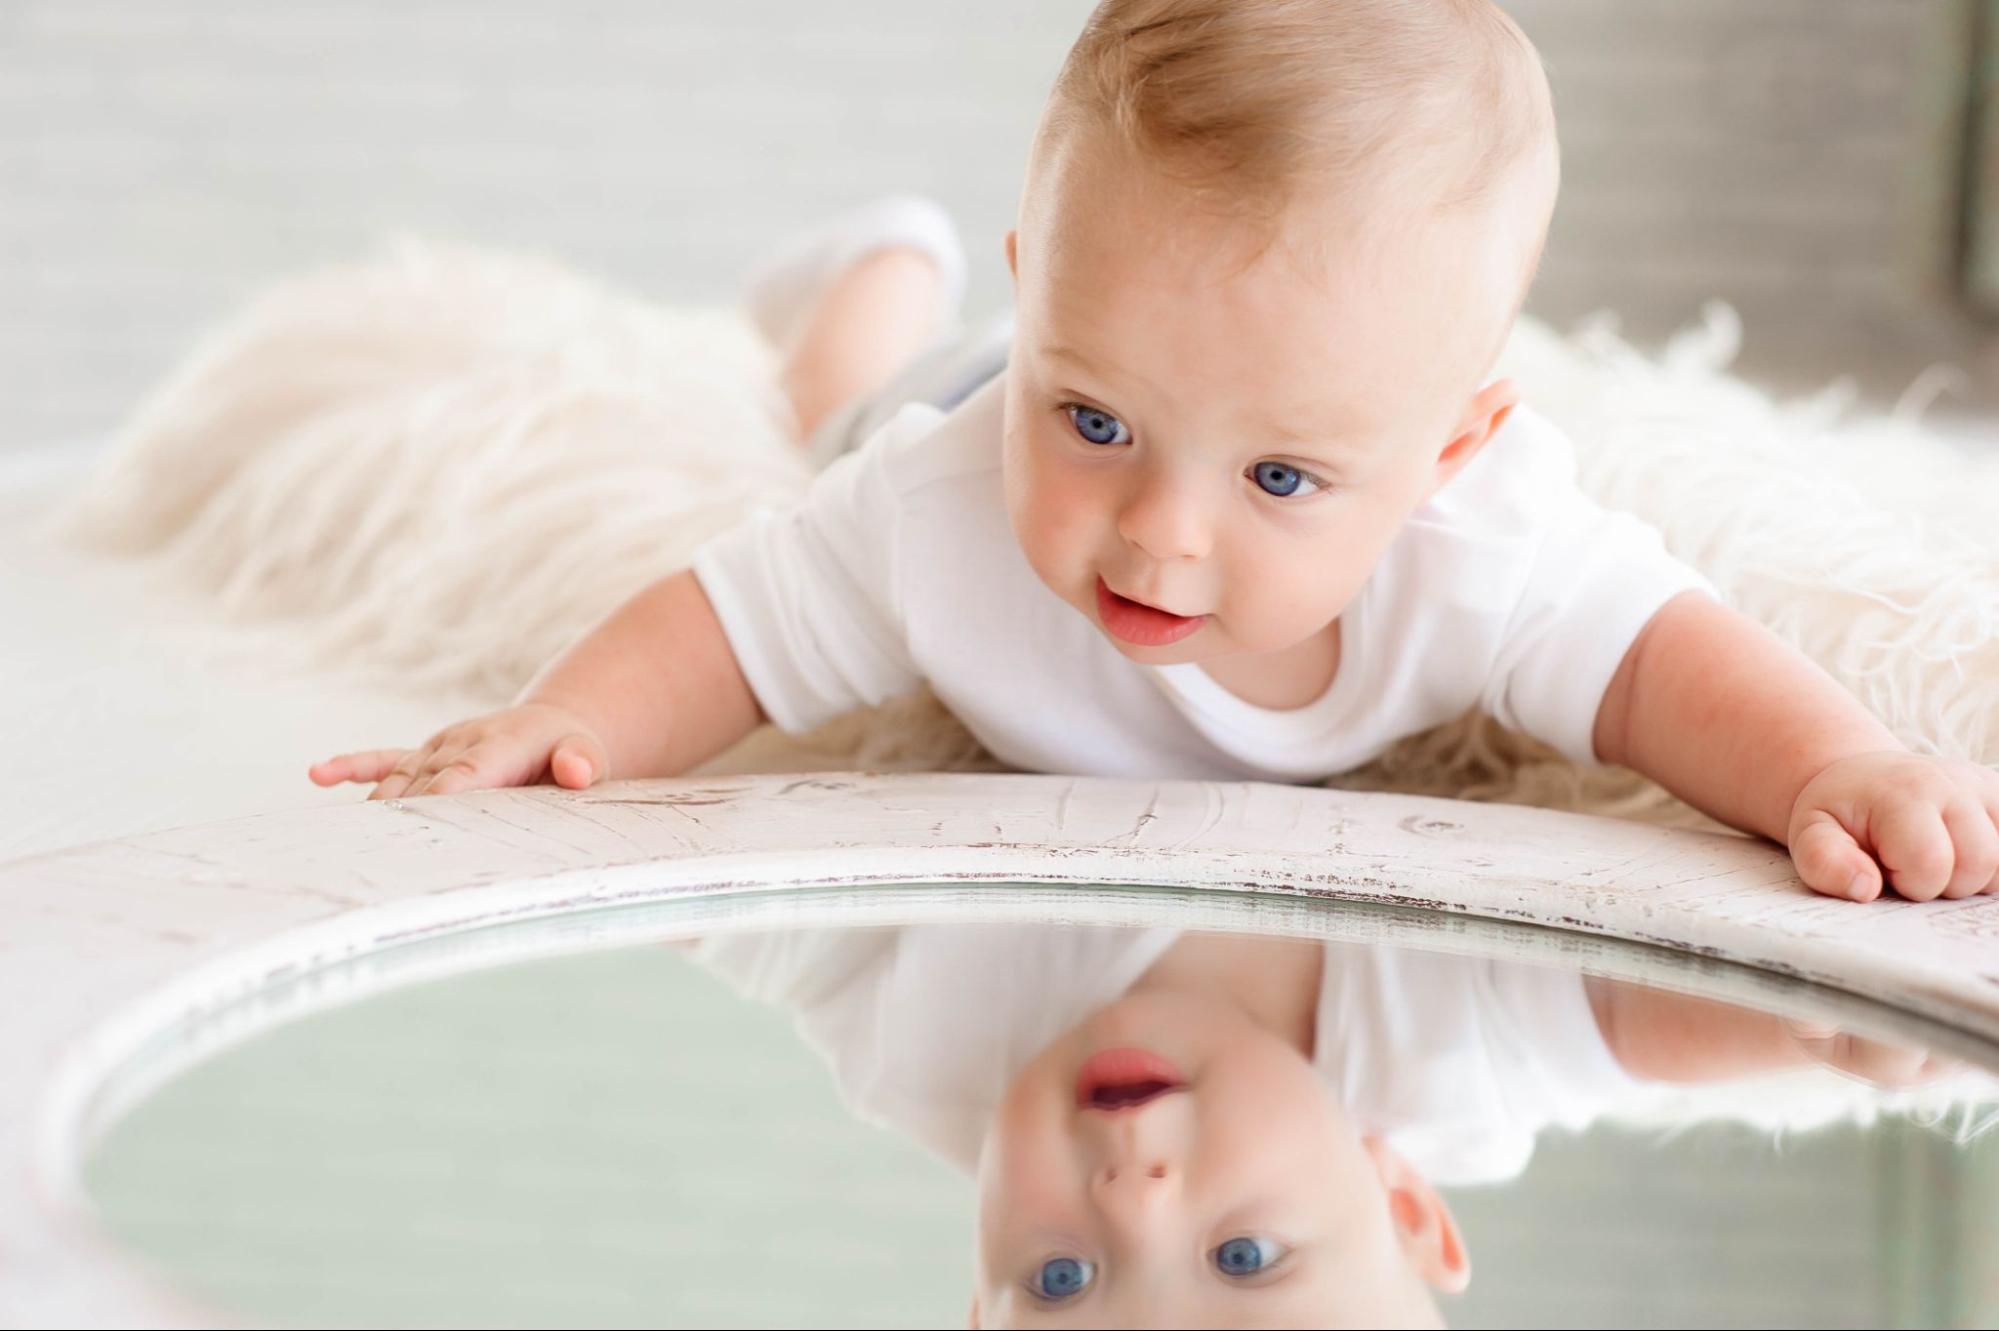 Curious baby looking at themselves in a mirror, capturing curiosity and self-discovery